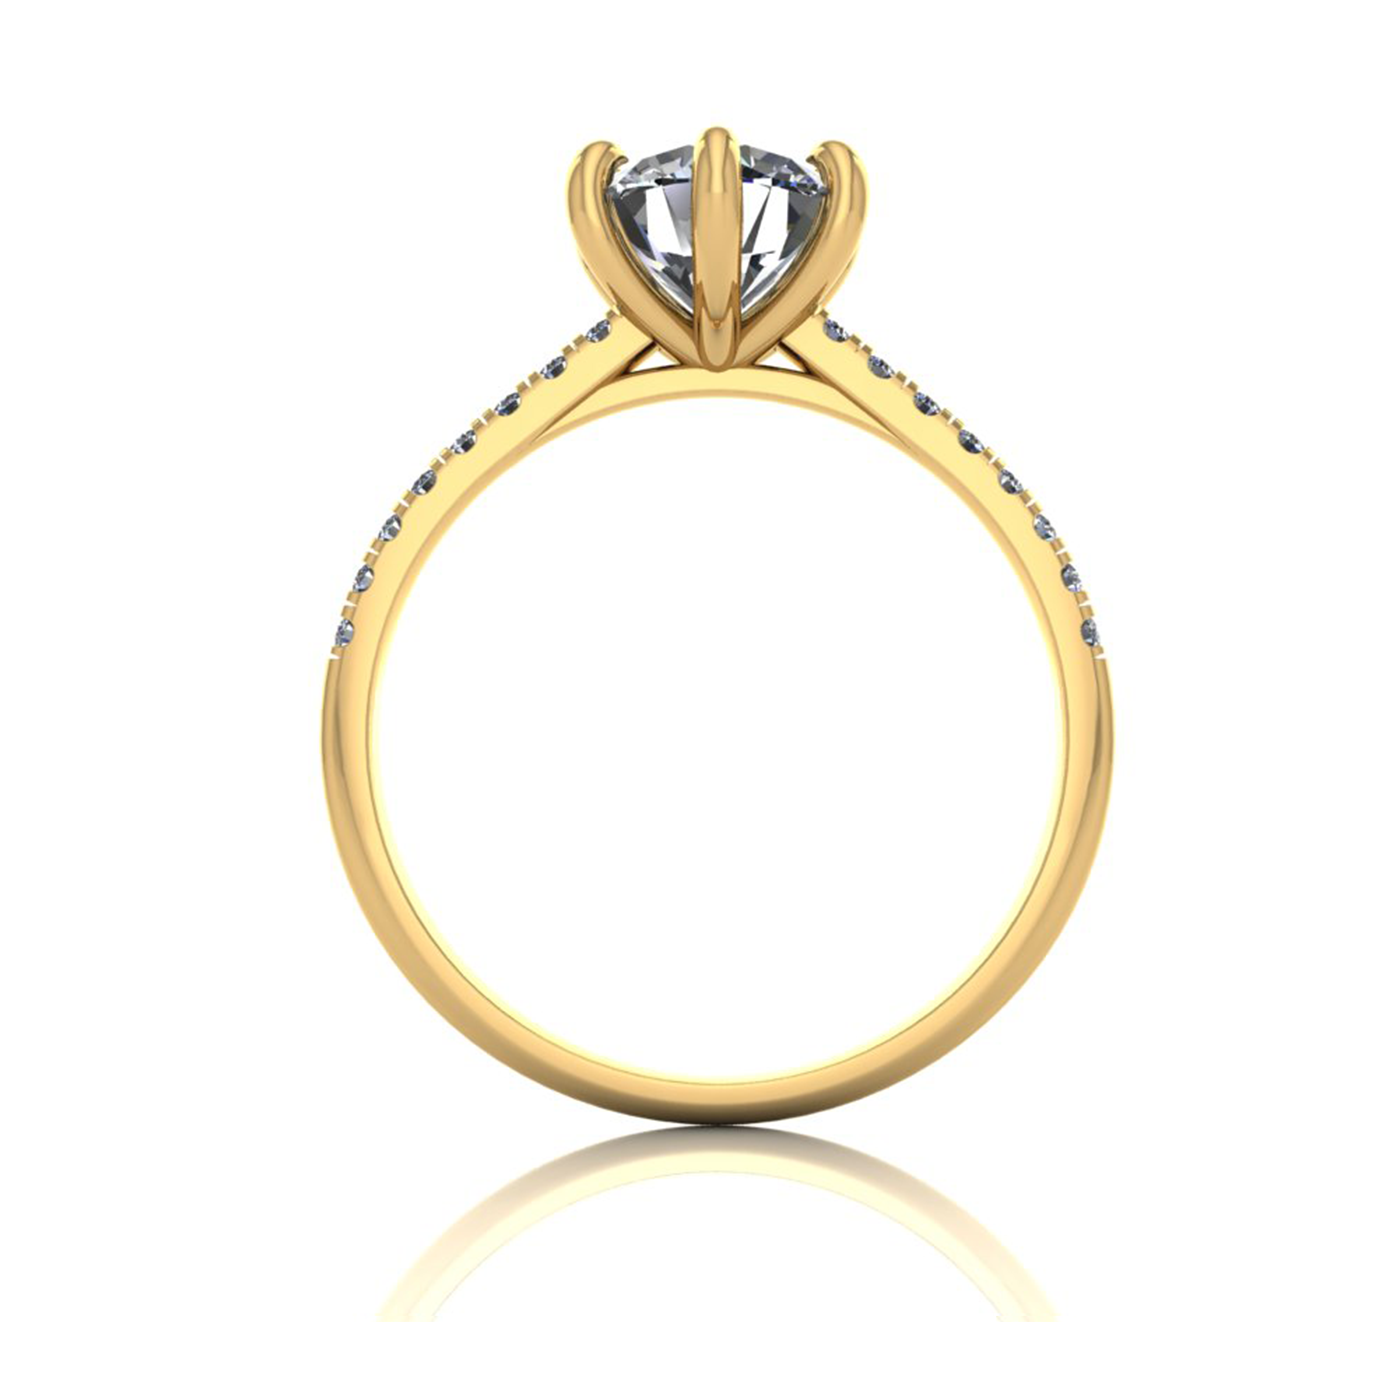 18k yellow gold 1,20 ct 6 prongs round cut diamond engagement ring with whisper thin pavÉ set band